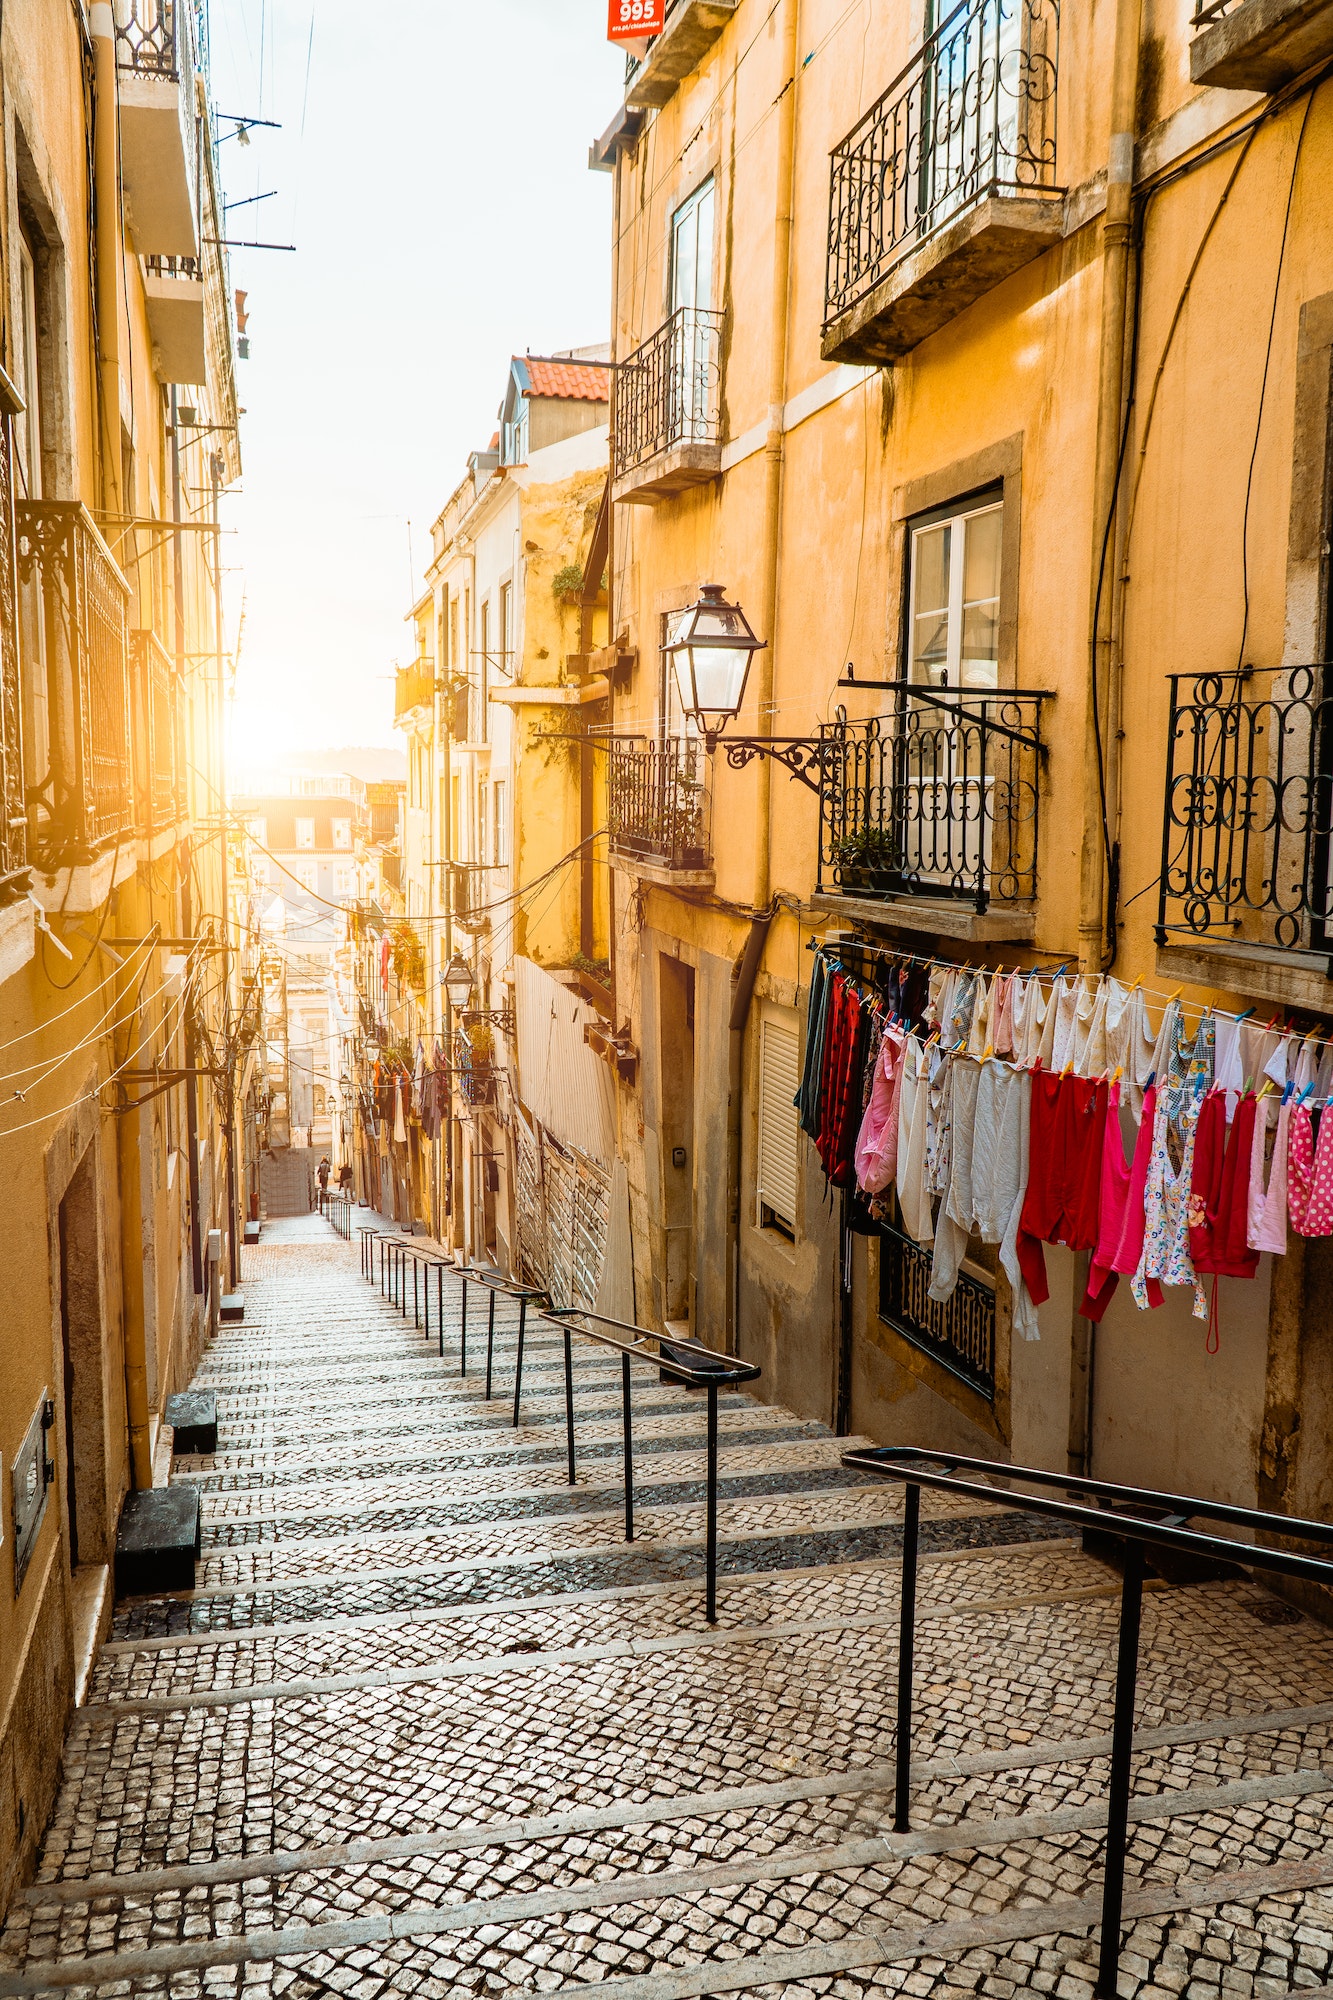 Staircase in the cobblestone street in Lisbon. Hanging laundry in typical narrow street. Sunset in